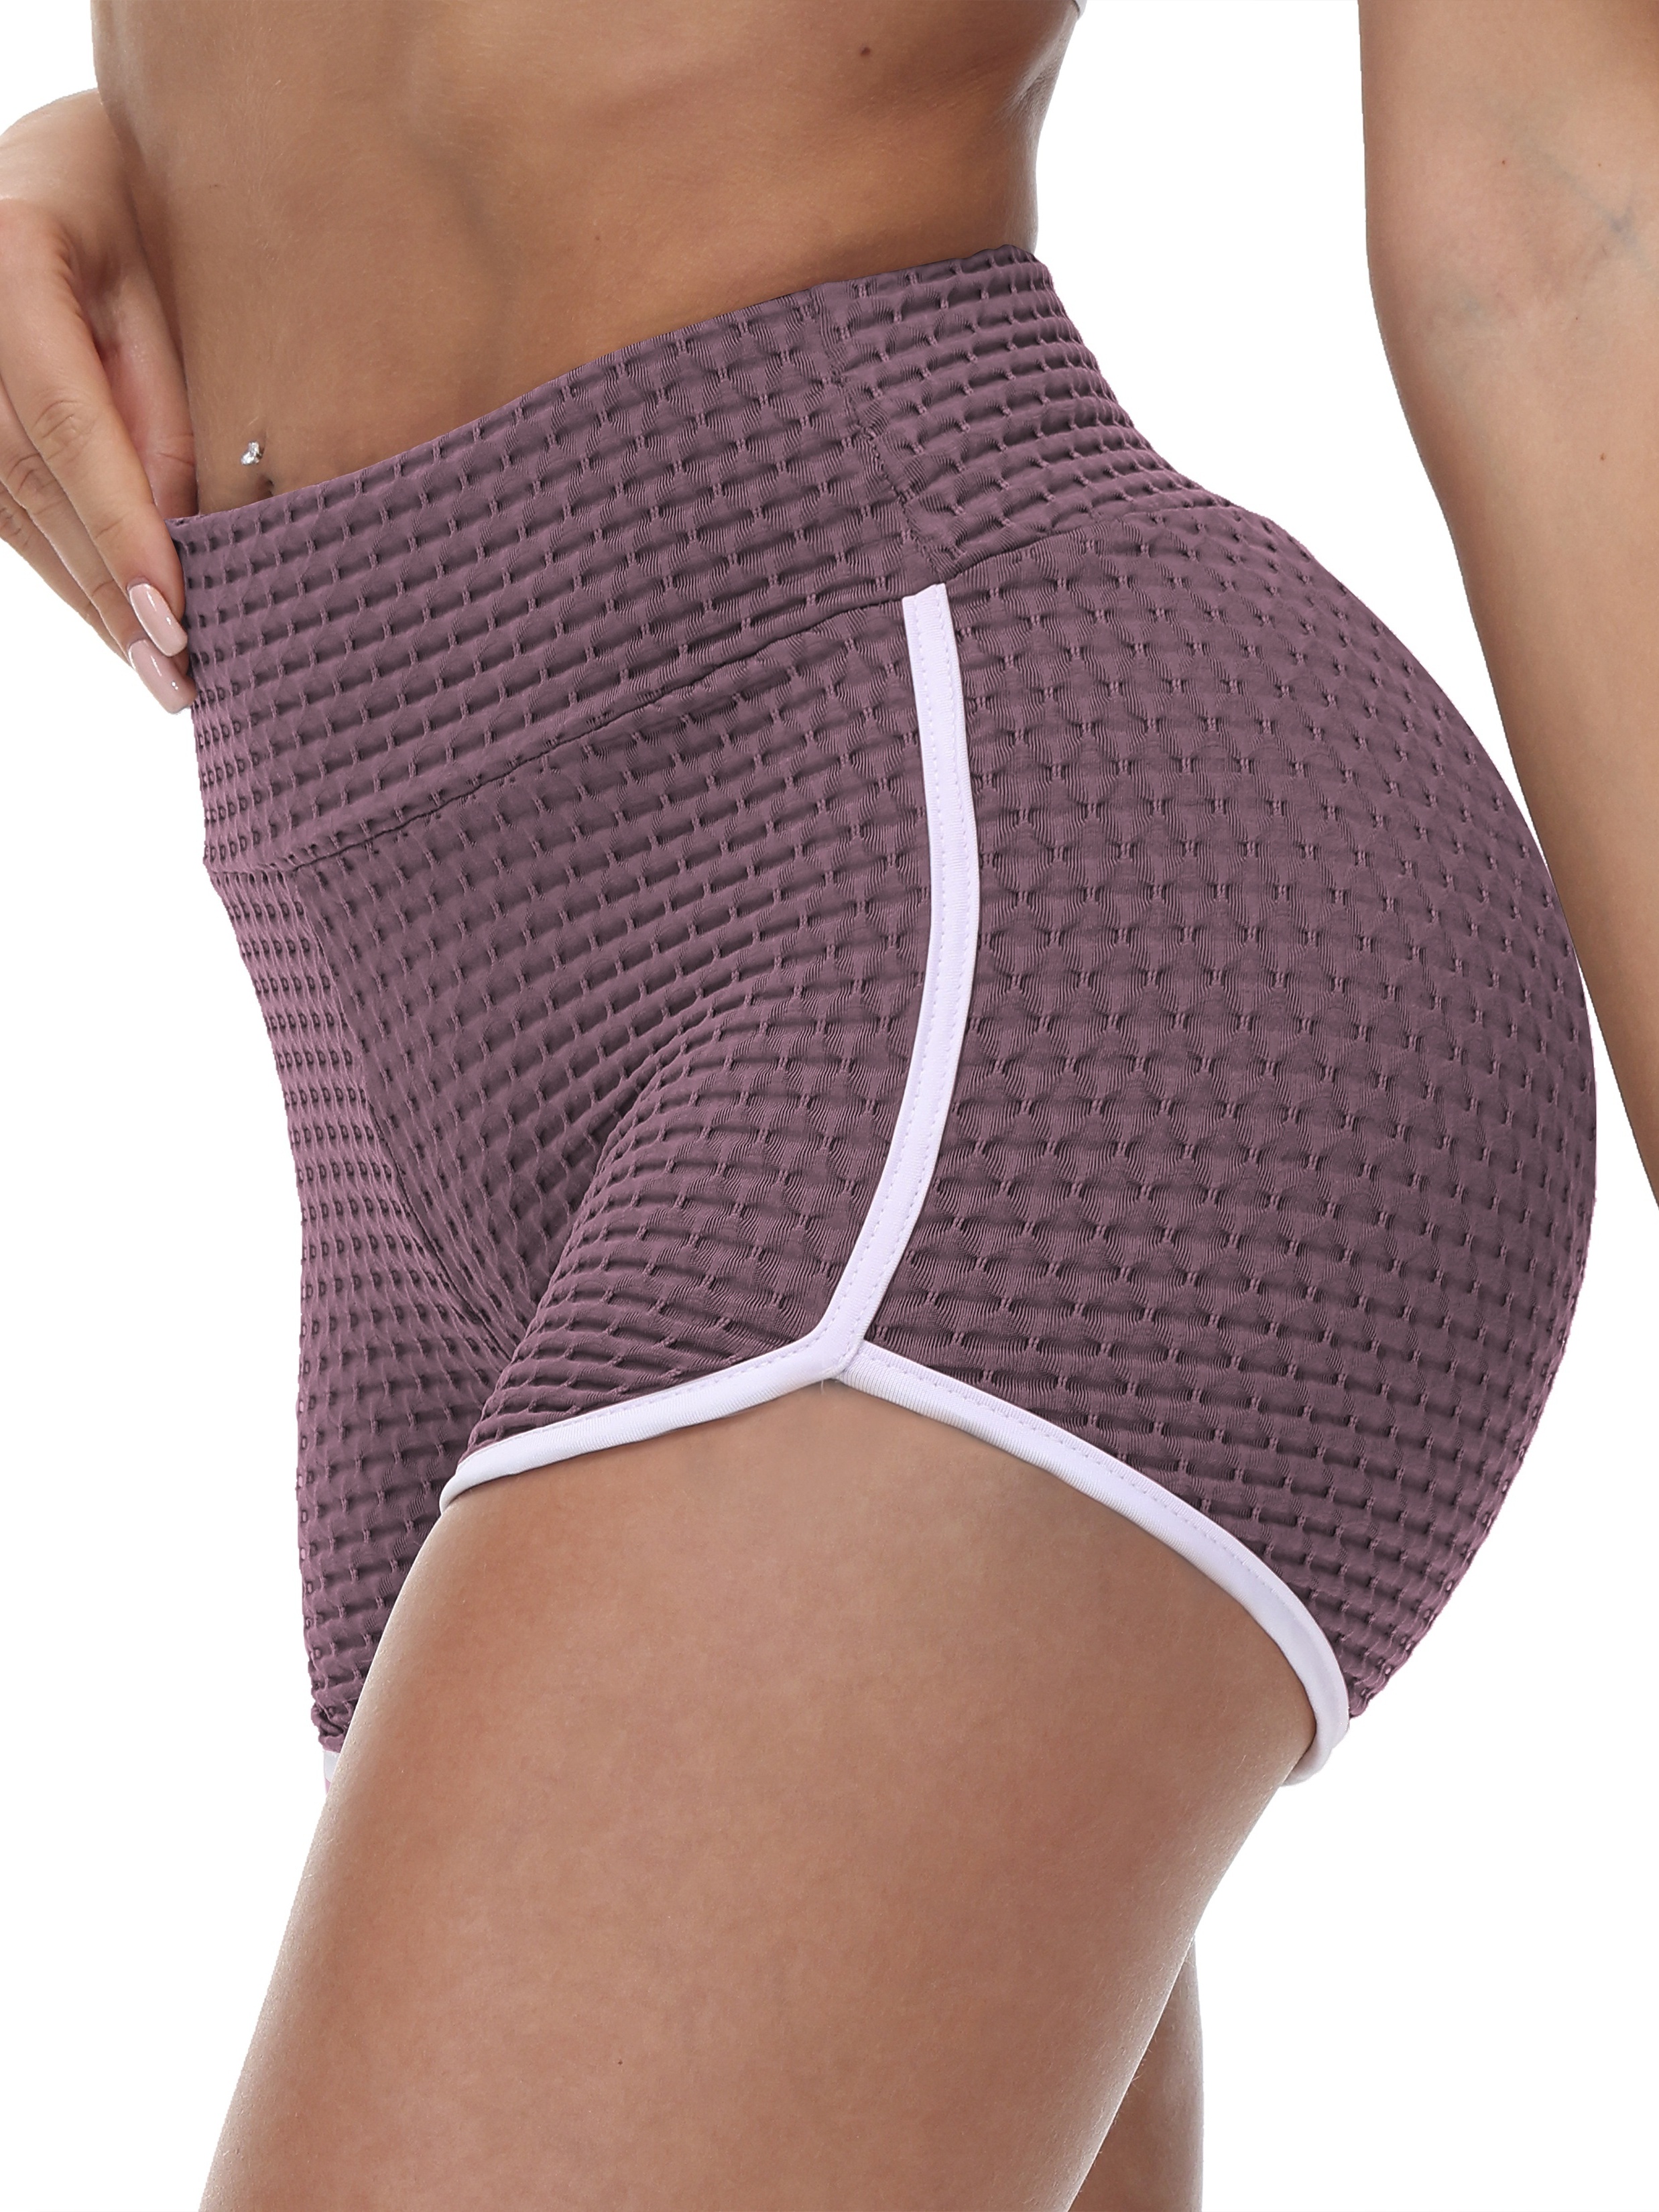 Solid Color Honeycomb Side Drawstring Shorts, High Stretchy Seersucker  Fabric Yoga Shorts, Women's Activewear